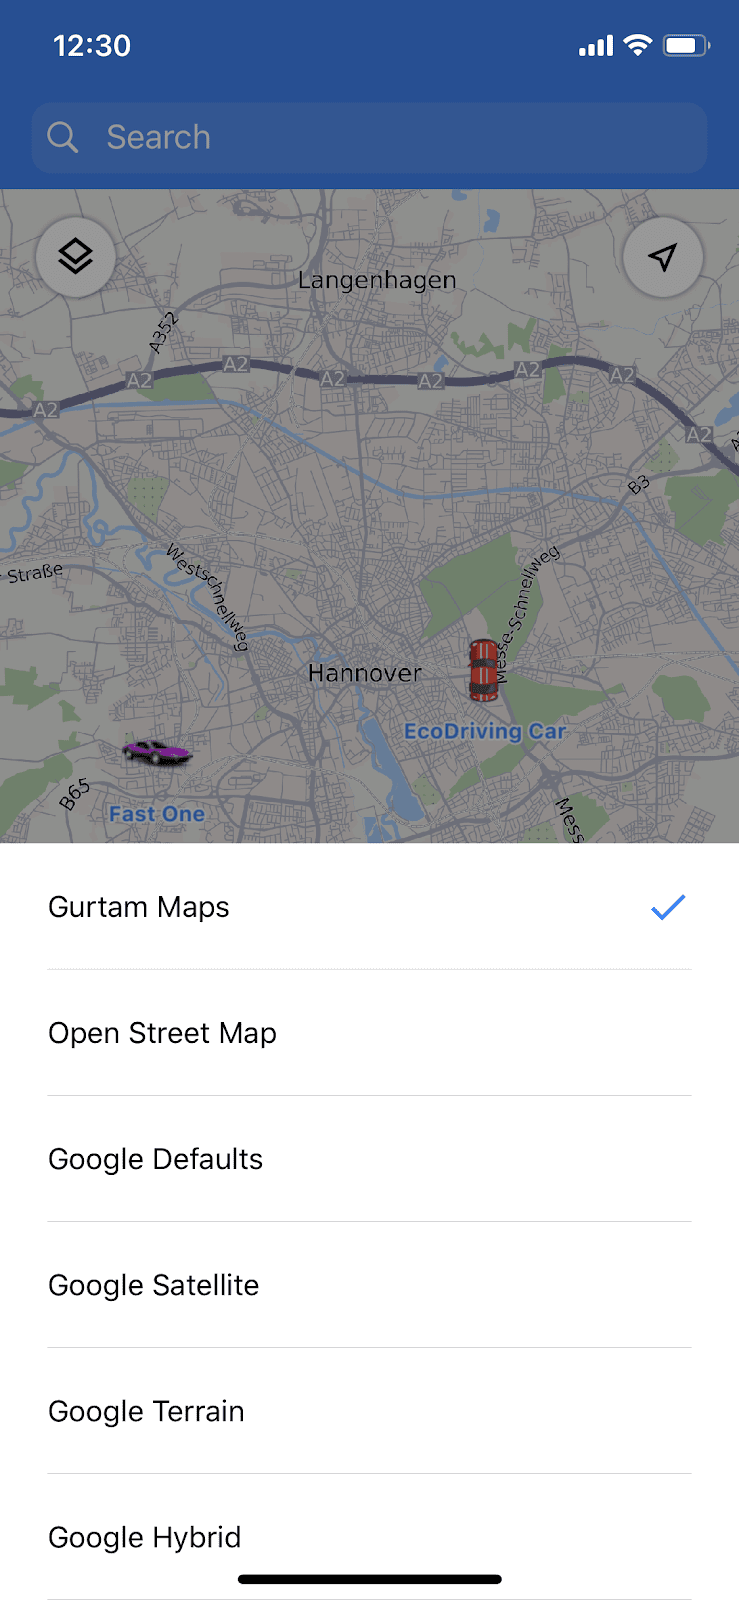 The list of available maps in Wialon app